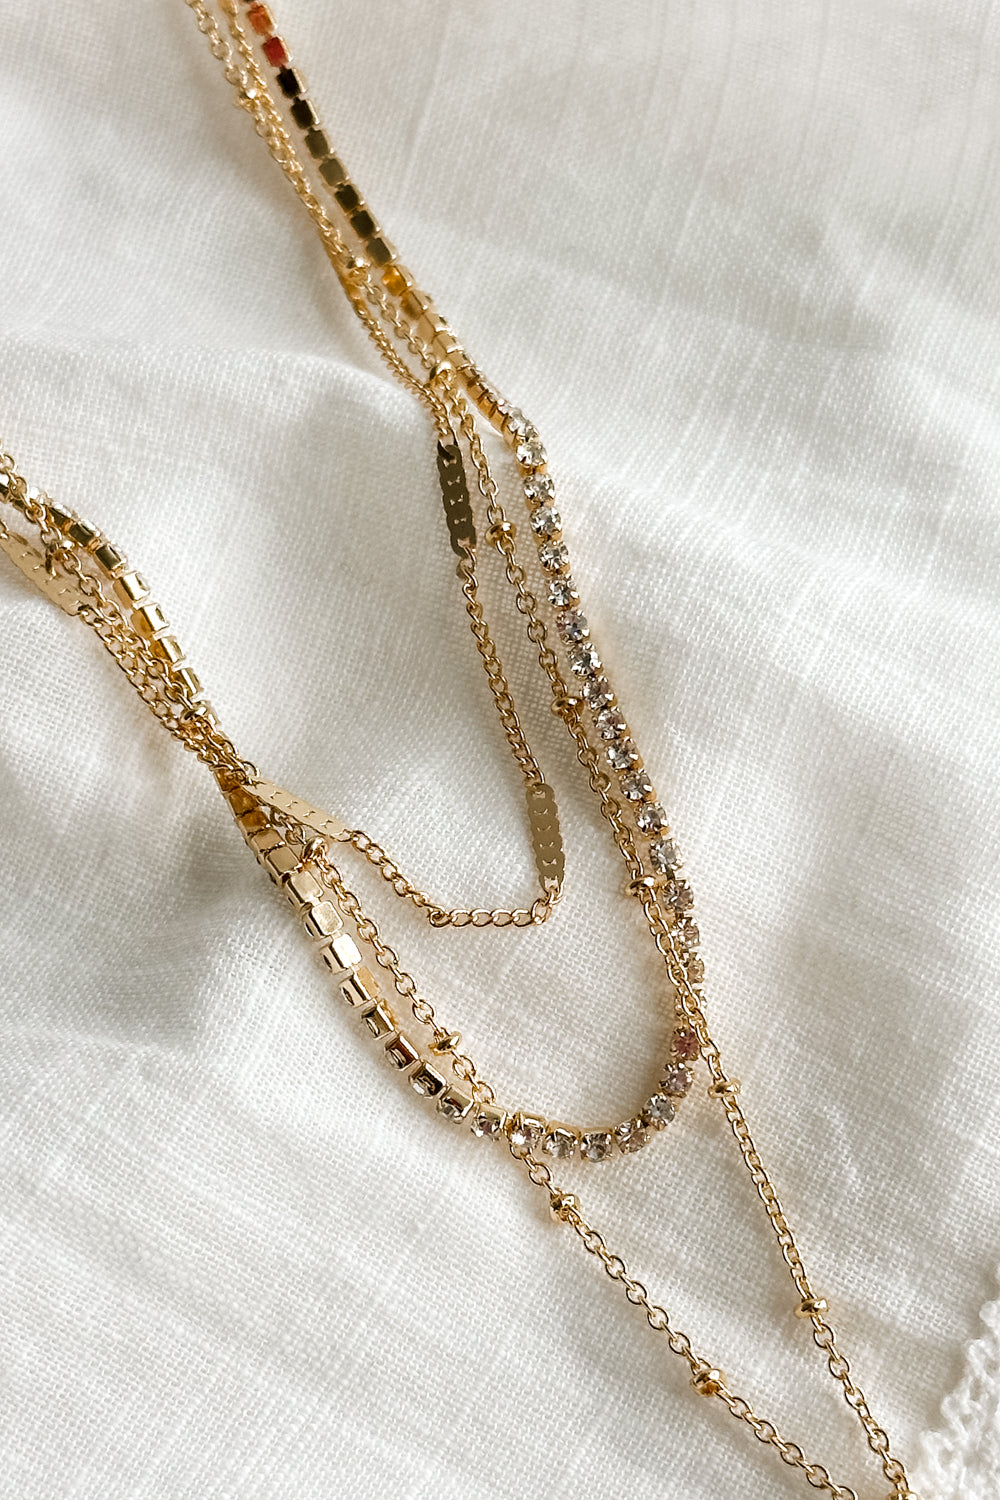 Close up view of the Celeste Gold Triple Layer Chain Heart Necklace which features two gold chain link layers, rhinestone layer, gold heart medallion and set in golds